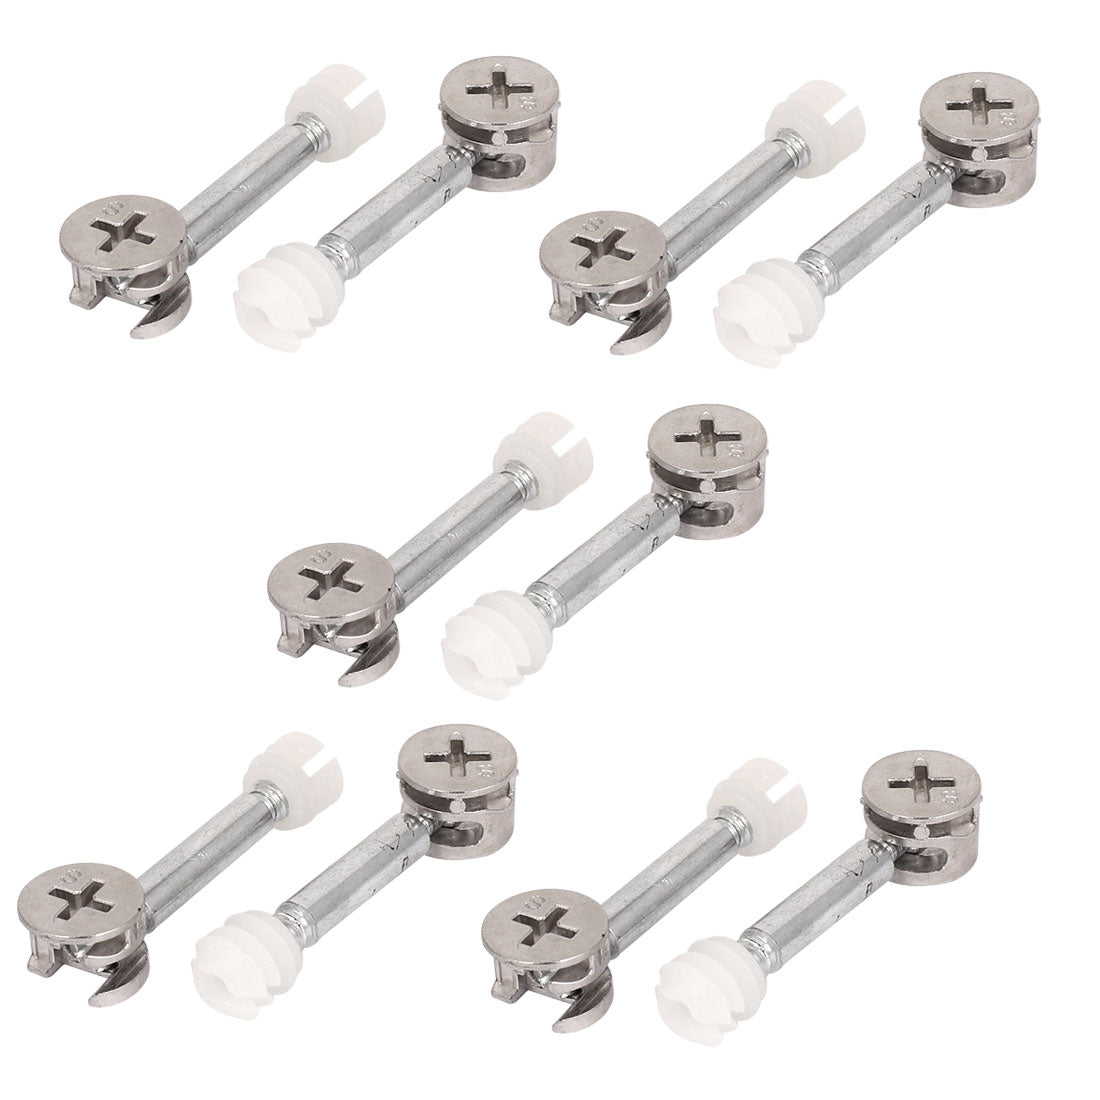 uxcell Uxcell Furniture Hardware 15mmx11mm Connection Screws Eccentric Nuts 10 Set